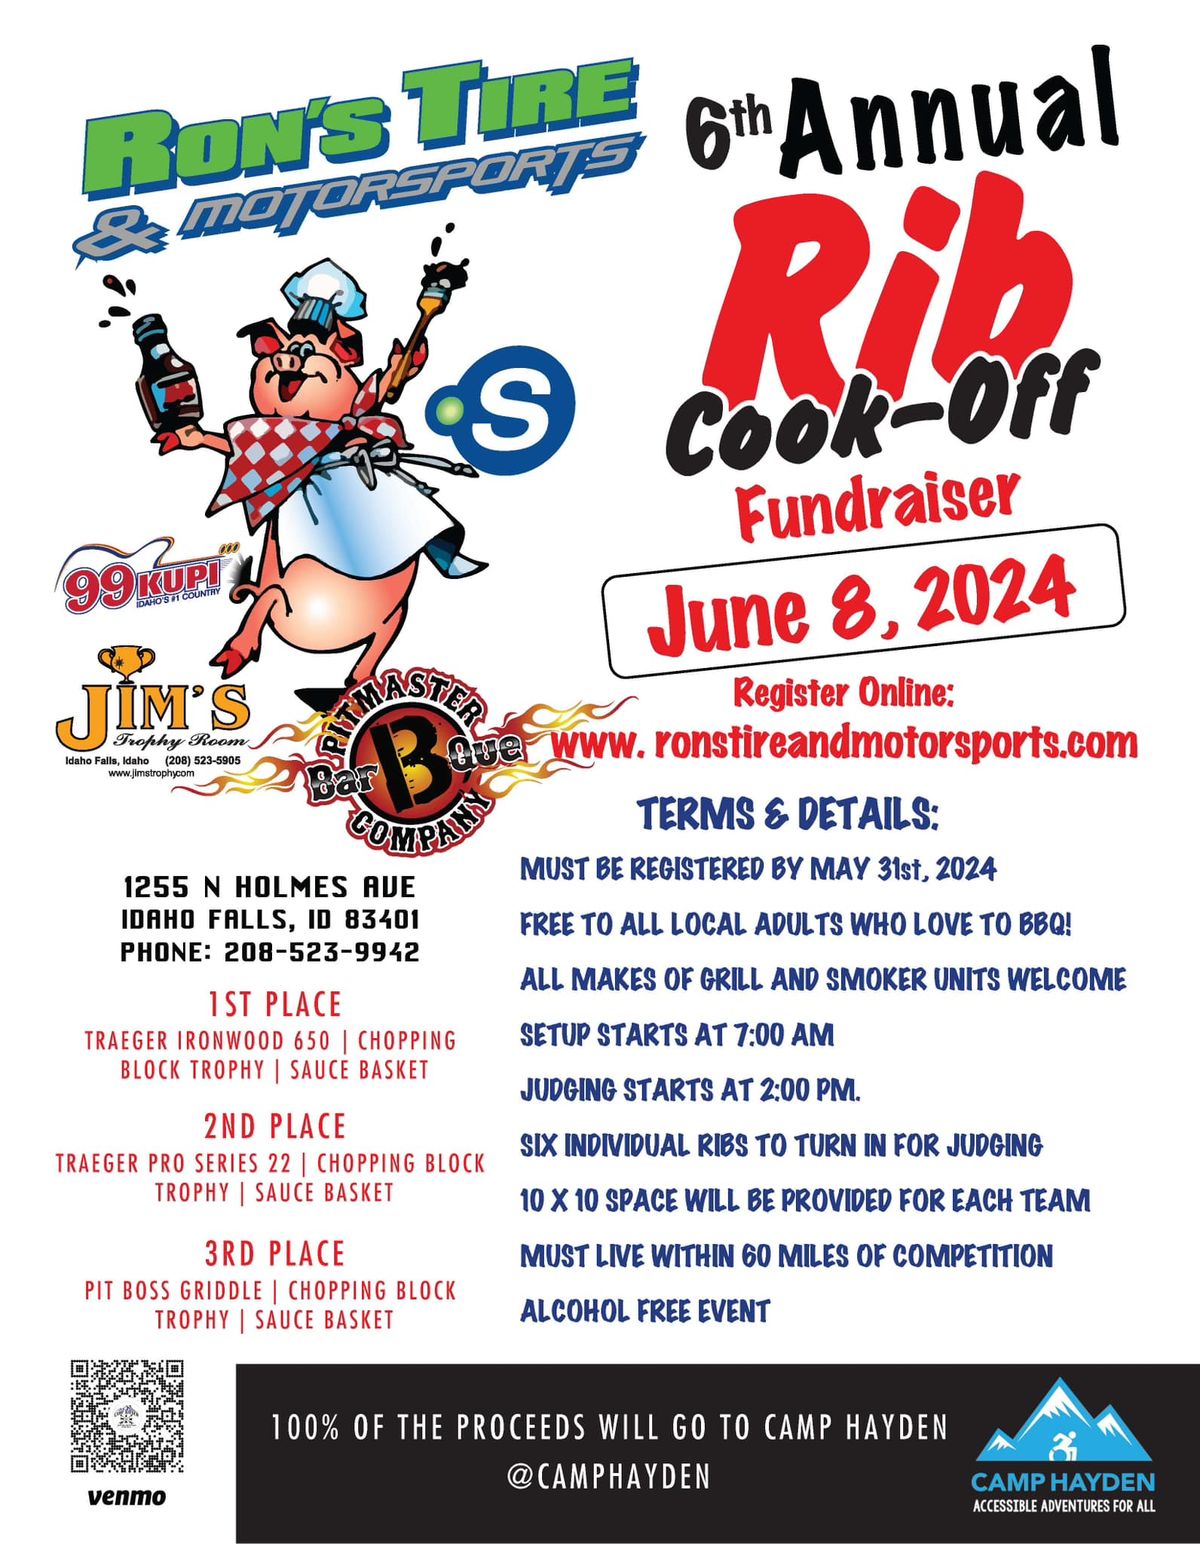 Rib Cook-Off Fundraiser for Camp Hayden